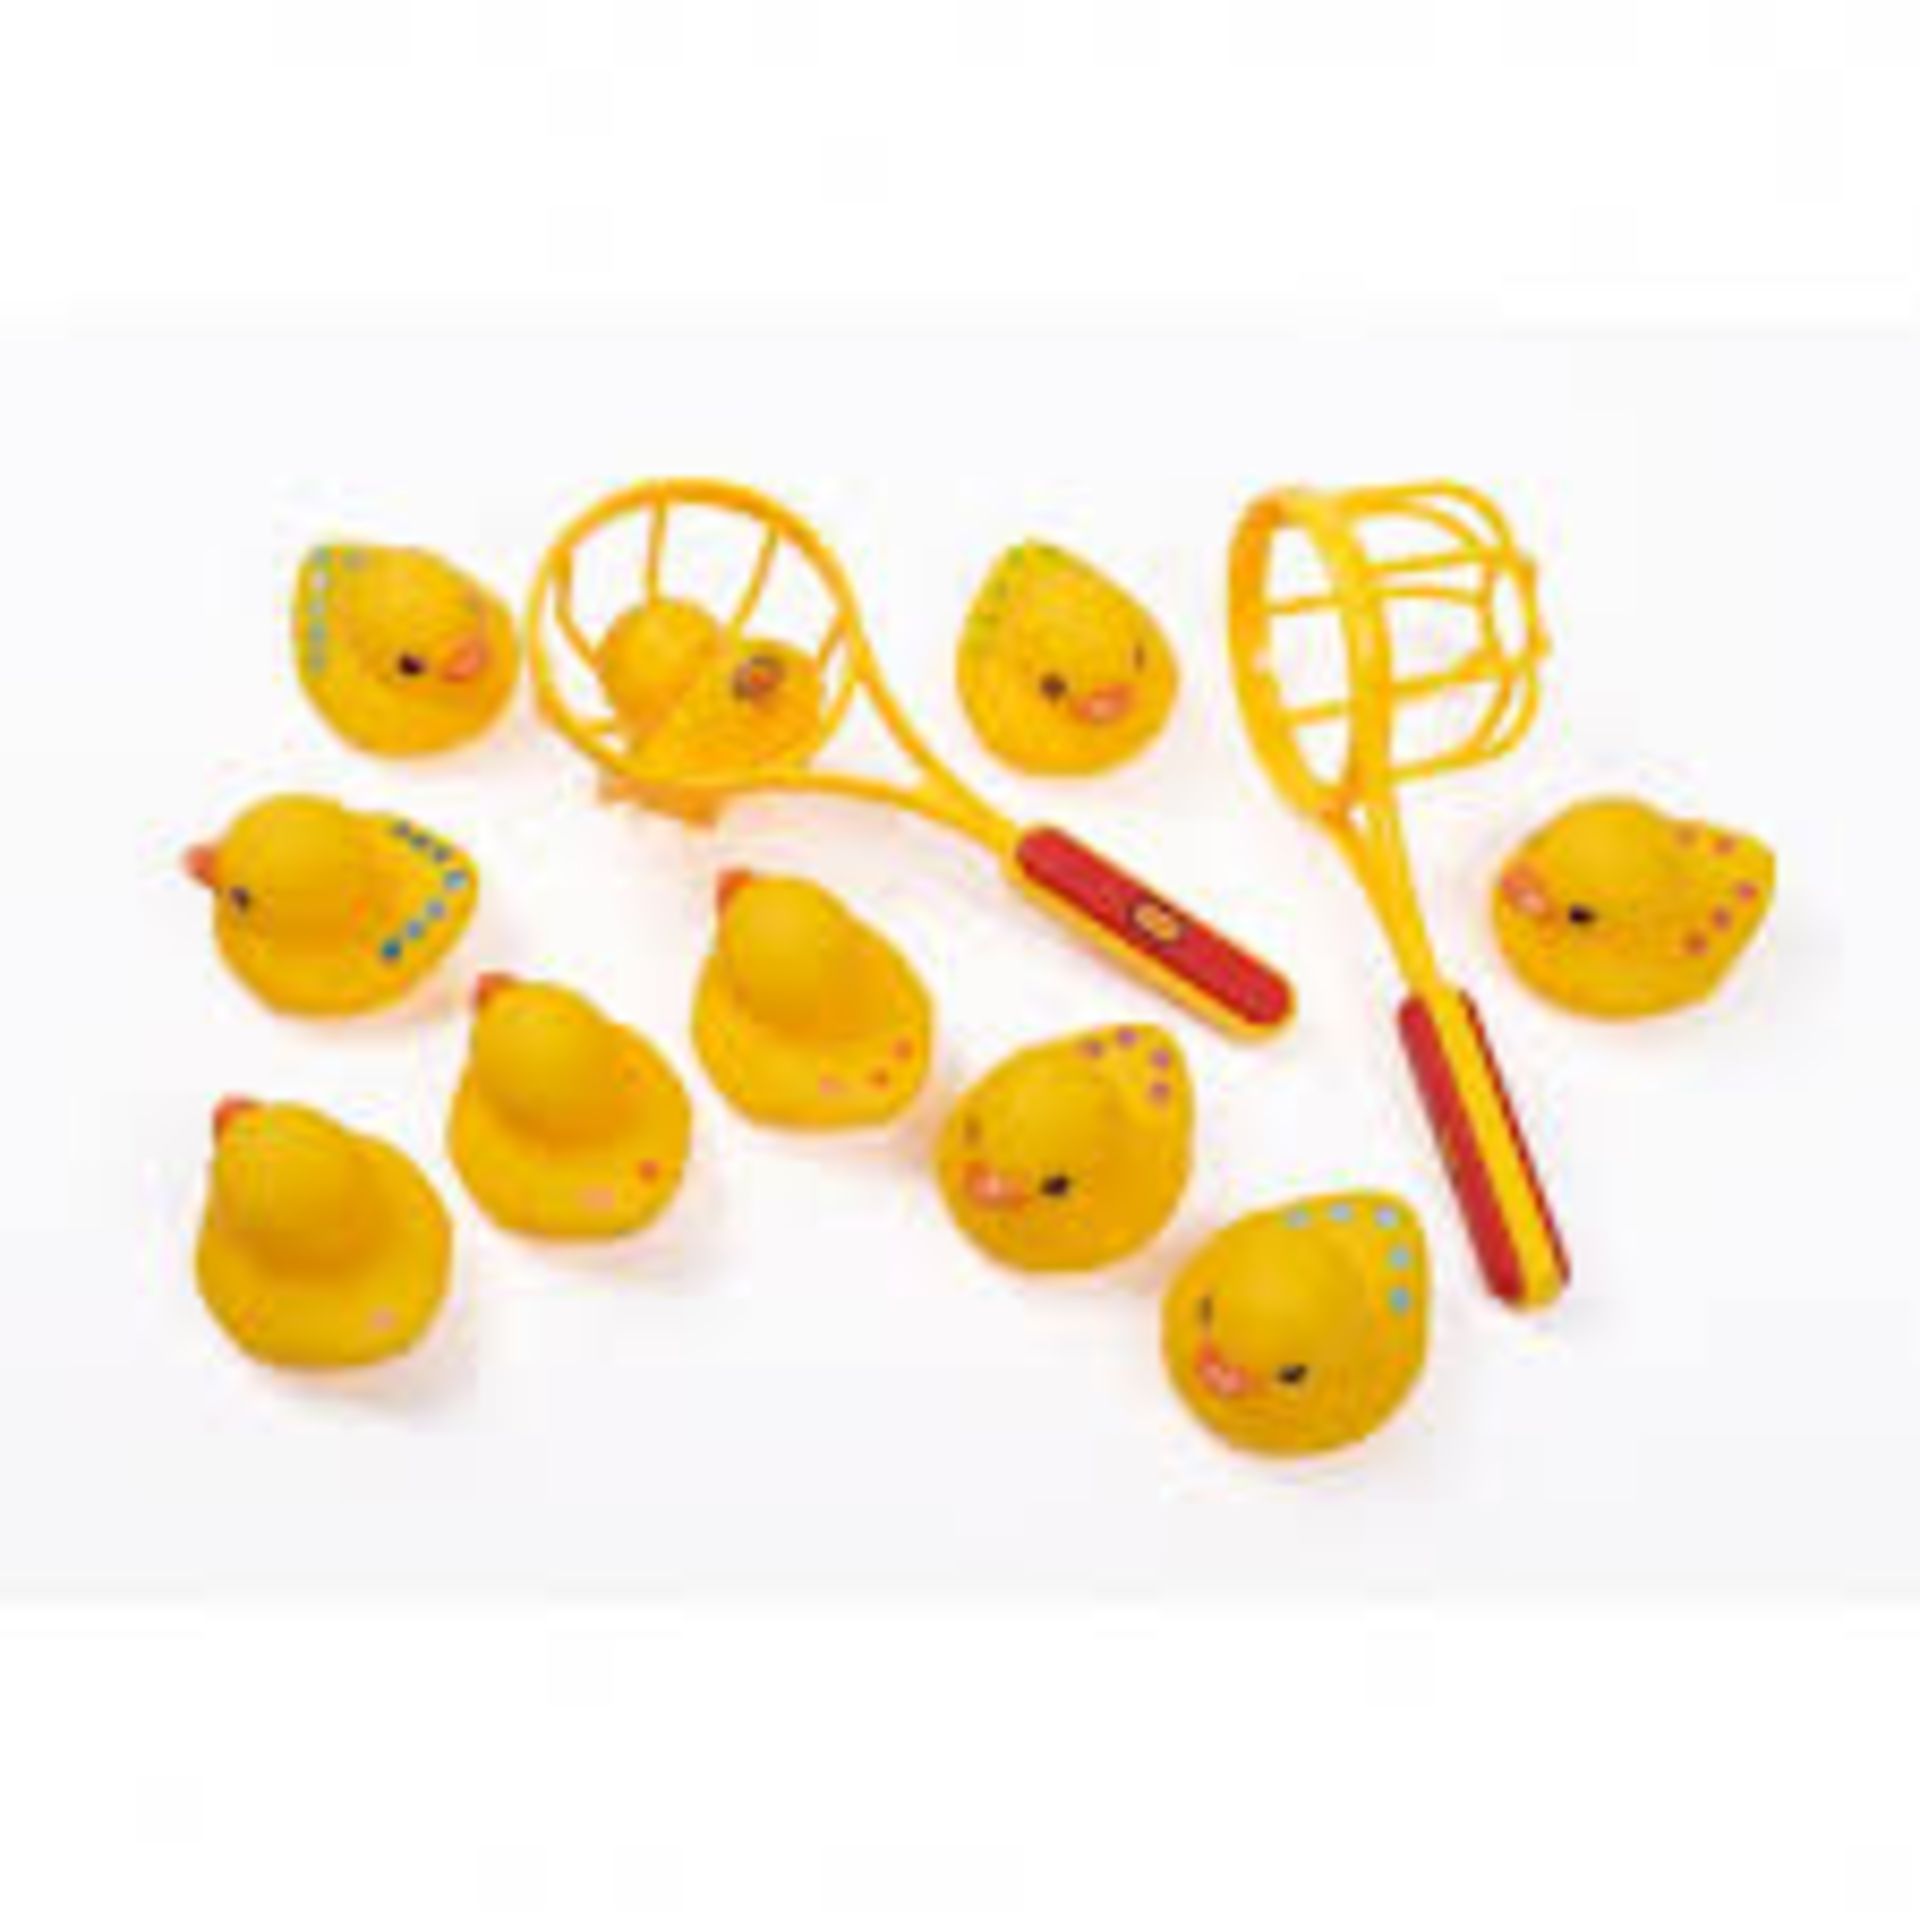 V *TRADE QTY* Brand New Tolo TL0085 Counting Ducks Game Consisting Of Ten Ducks & Two Catching